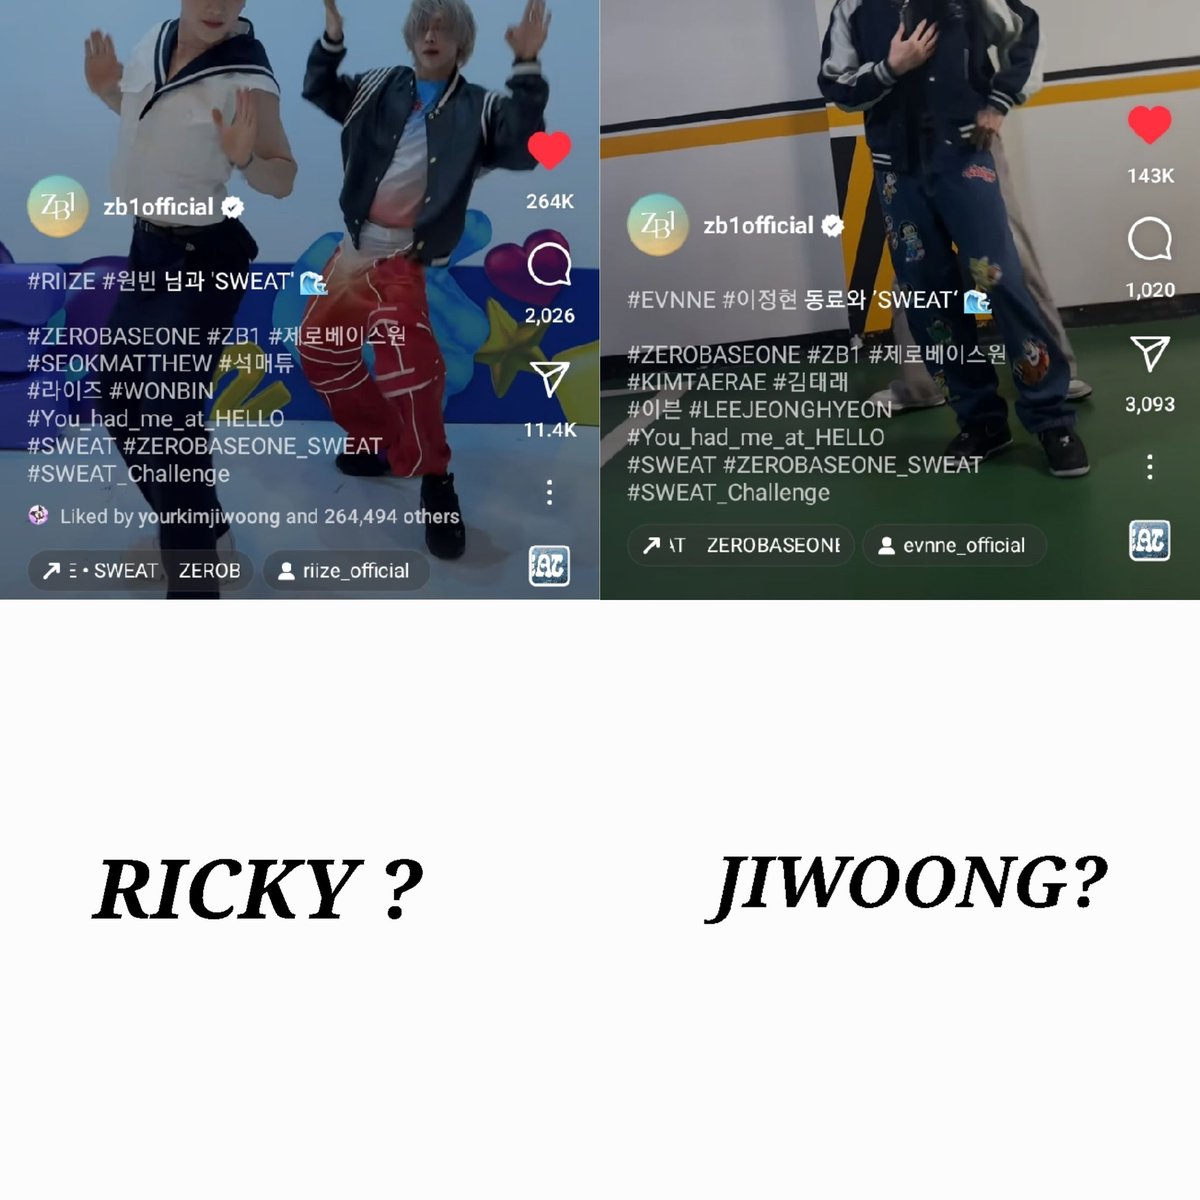 where is minamz sweat challenge with other idols? aren't they promote sweat in 4 music shows too?

#WakeoneTreatRickyFairly
#JiwoongDeservesBetter
#FairTreatmentForJiwoong